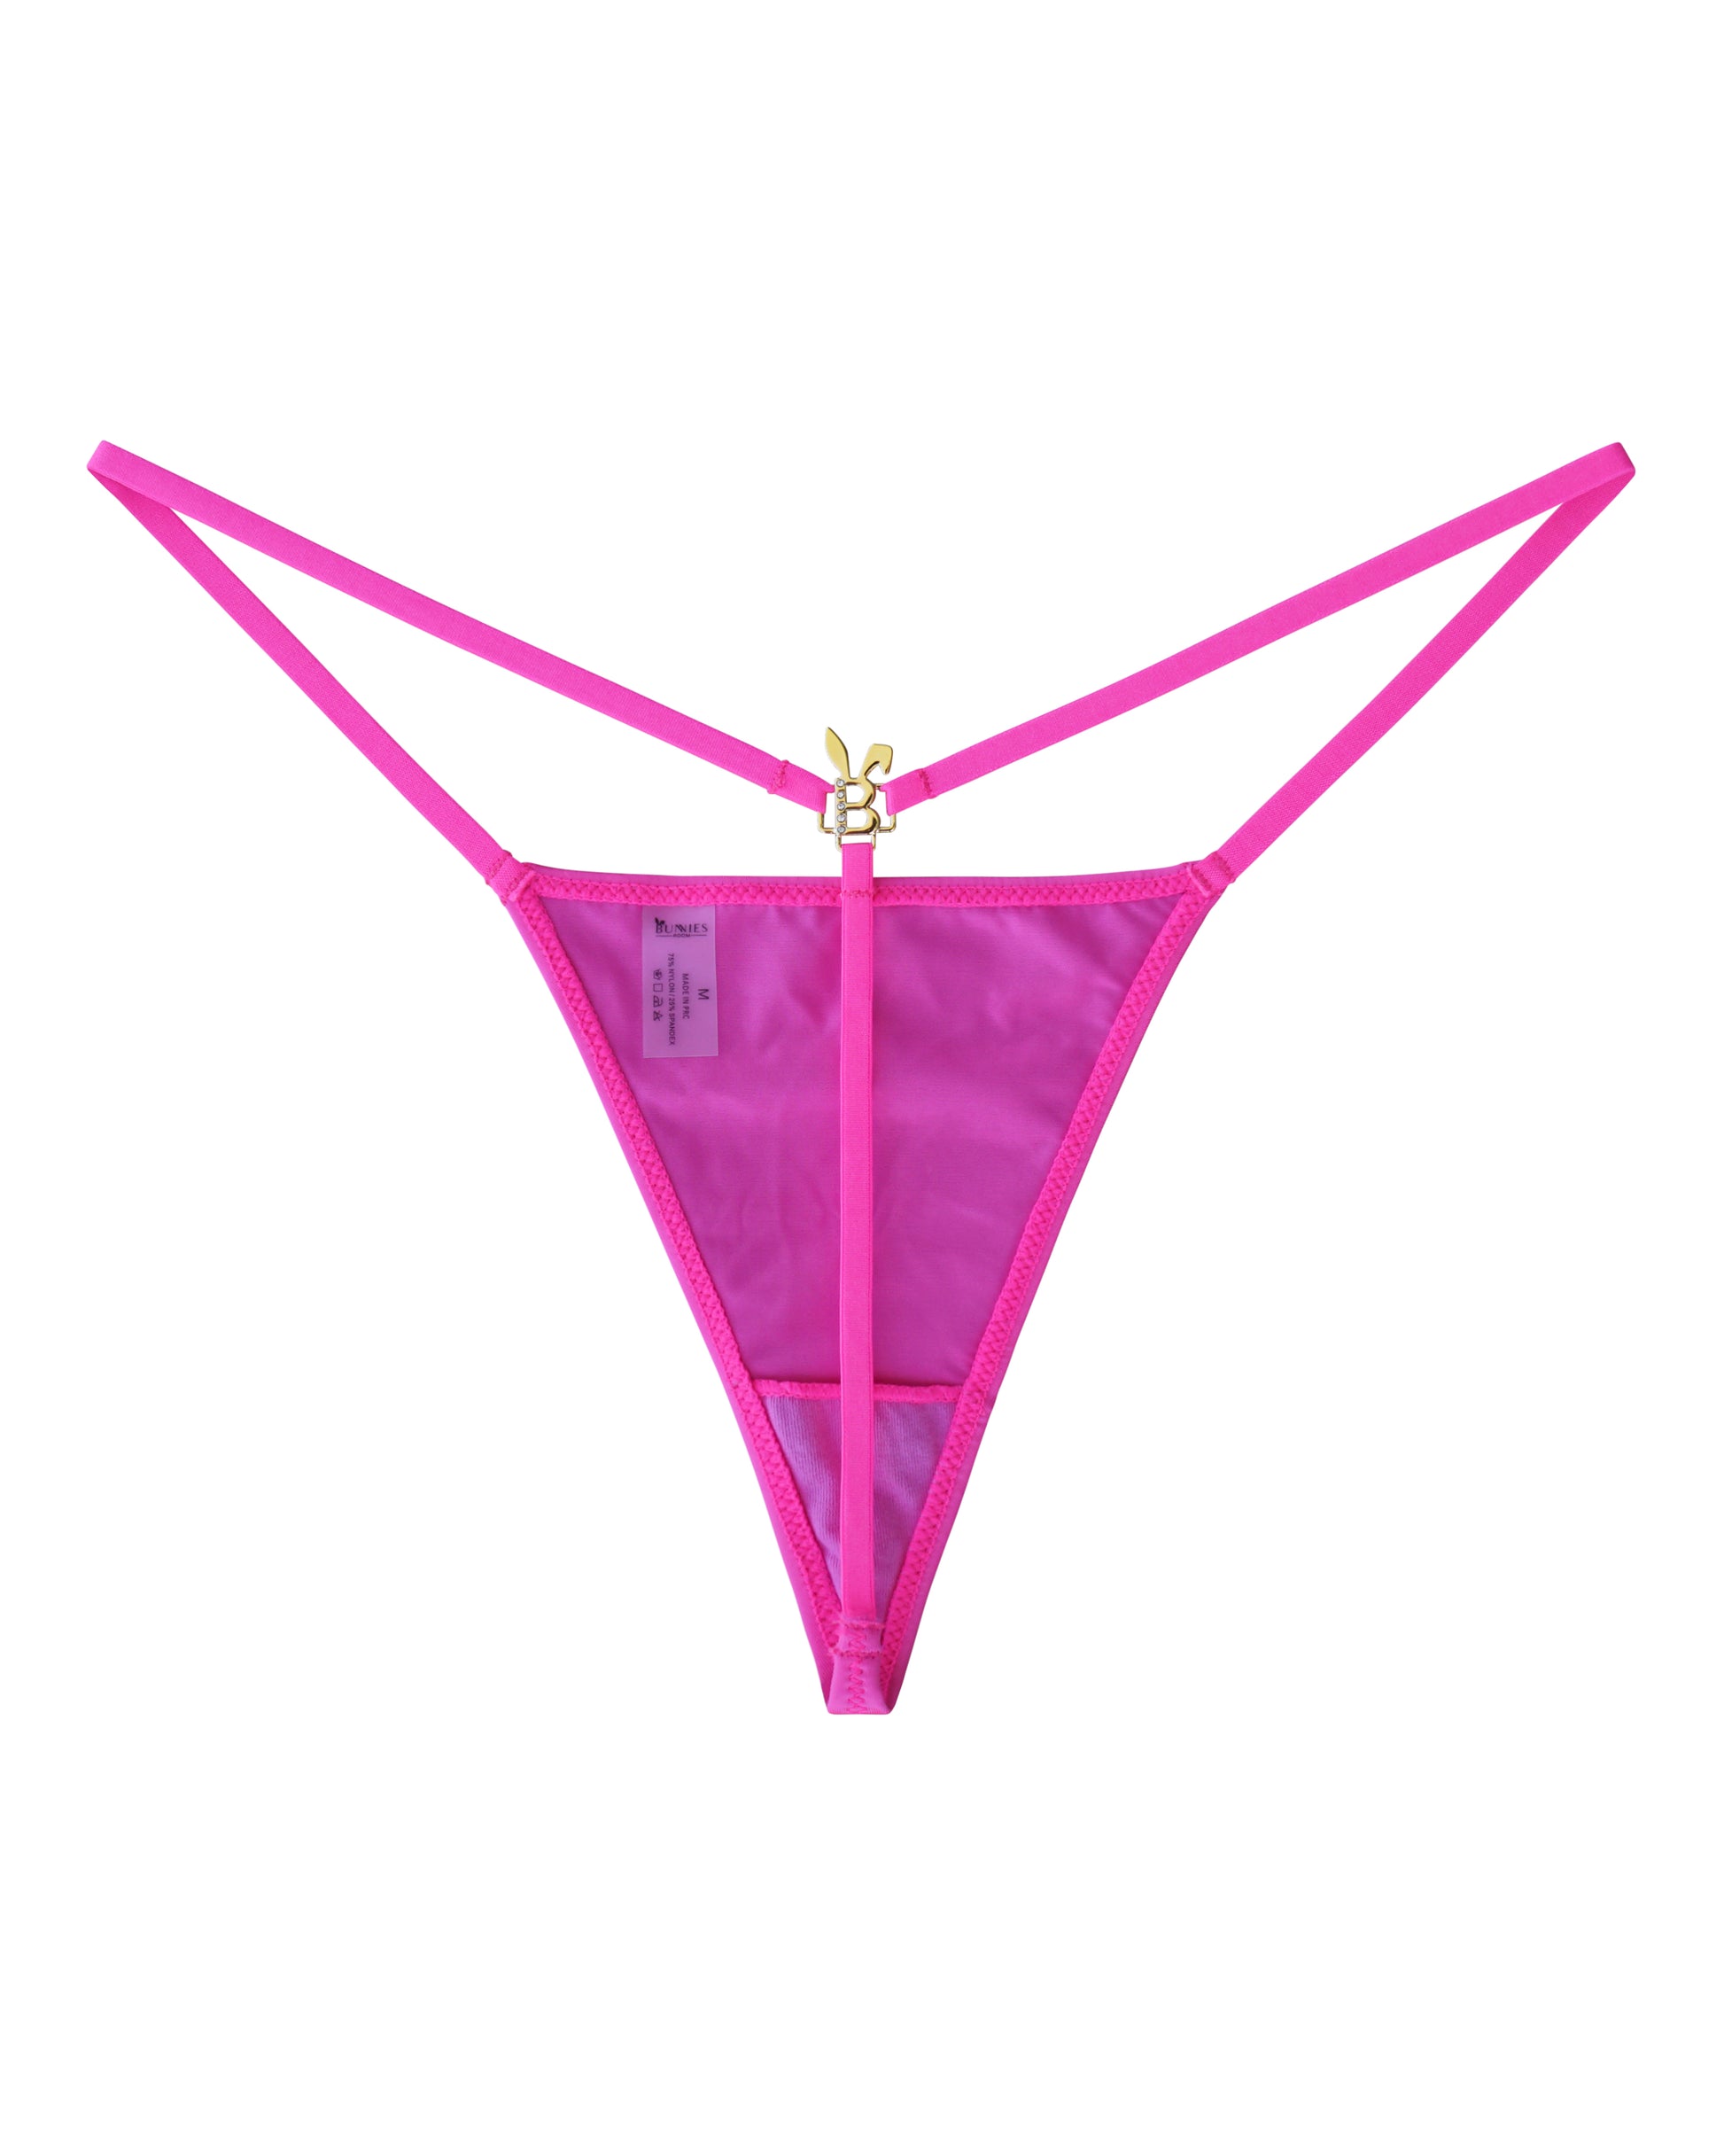 BUNNY G-STRING THONG IN HOT PINK – BUNNIES' ROOM